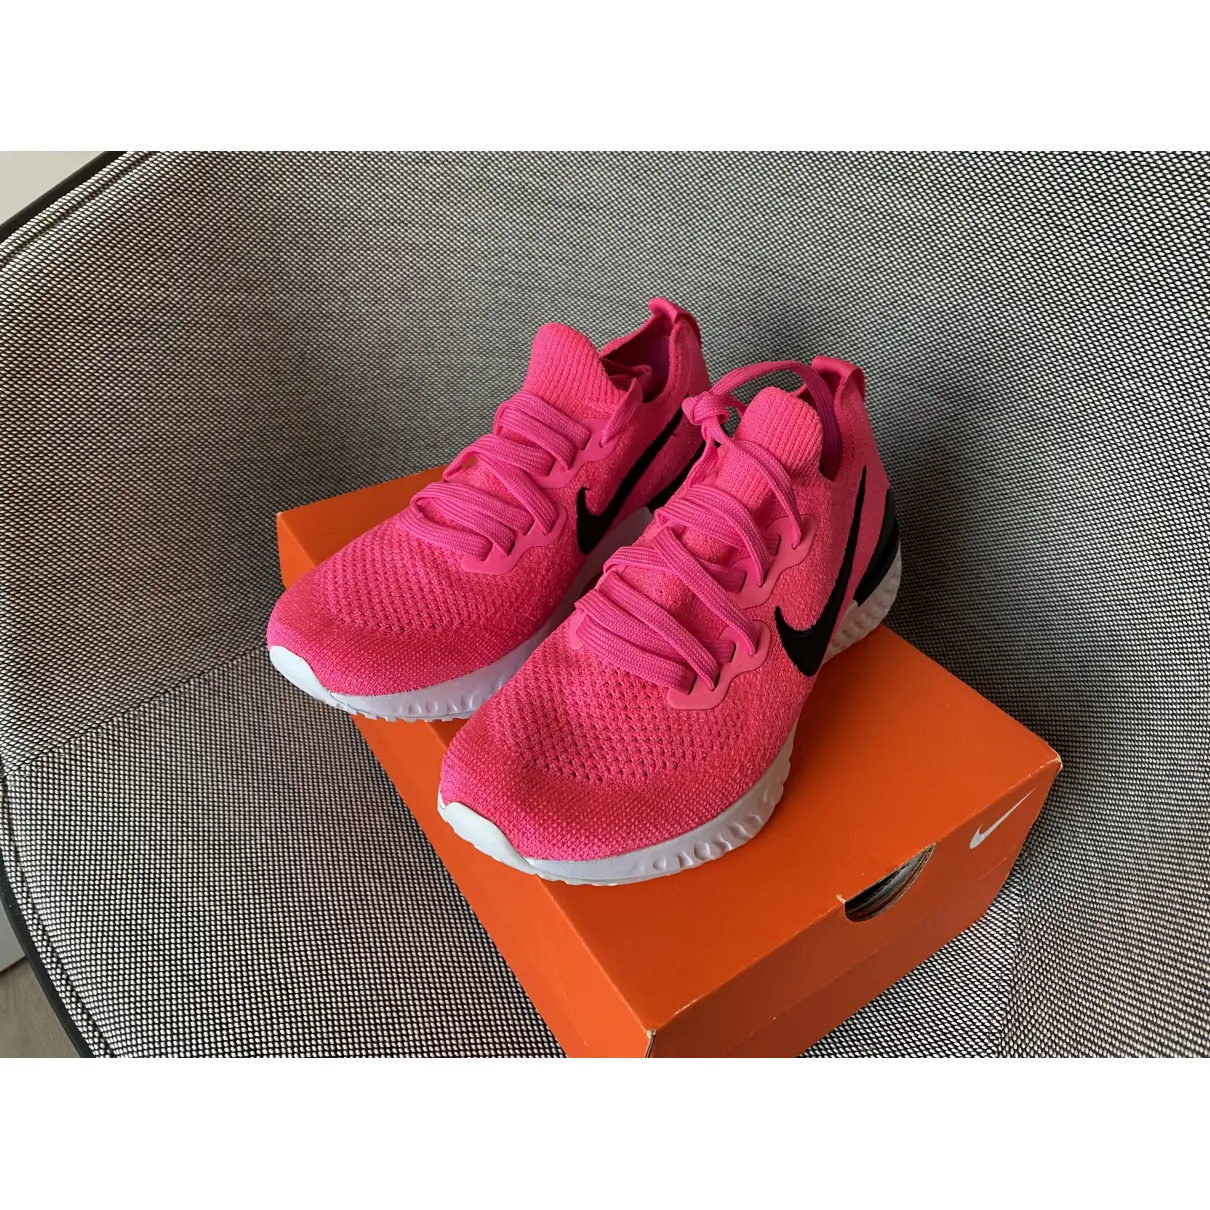 Buy Nike Epic React cloth trainers online